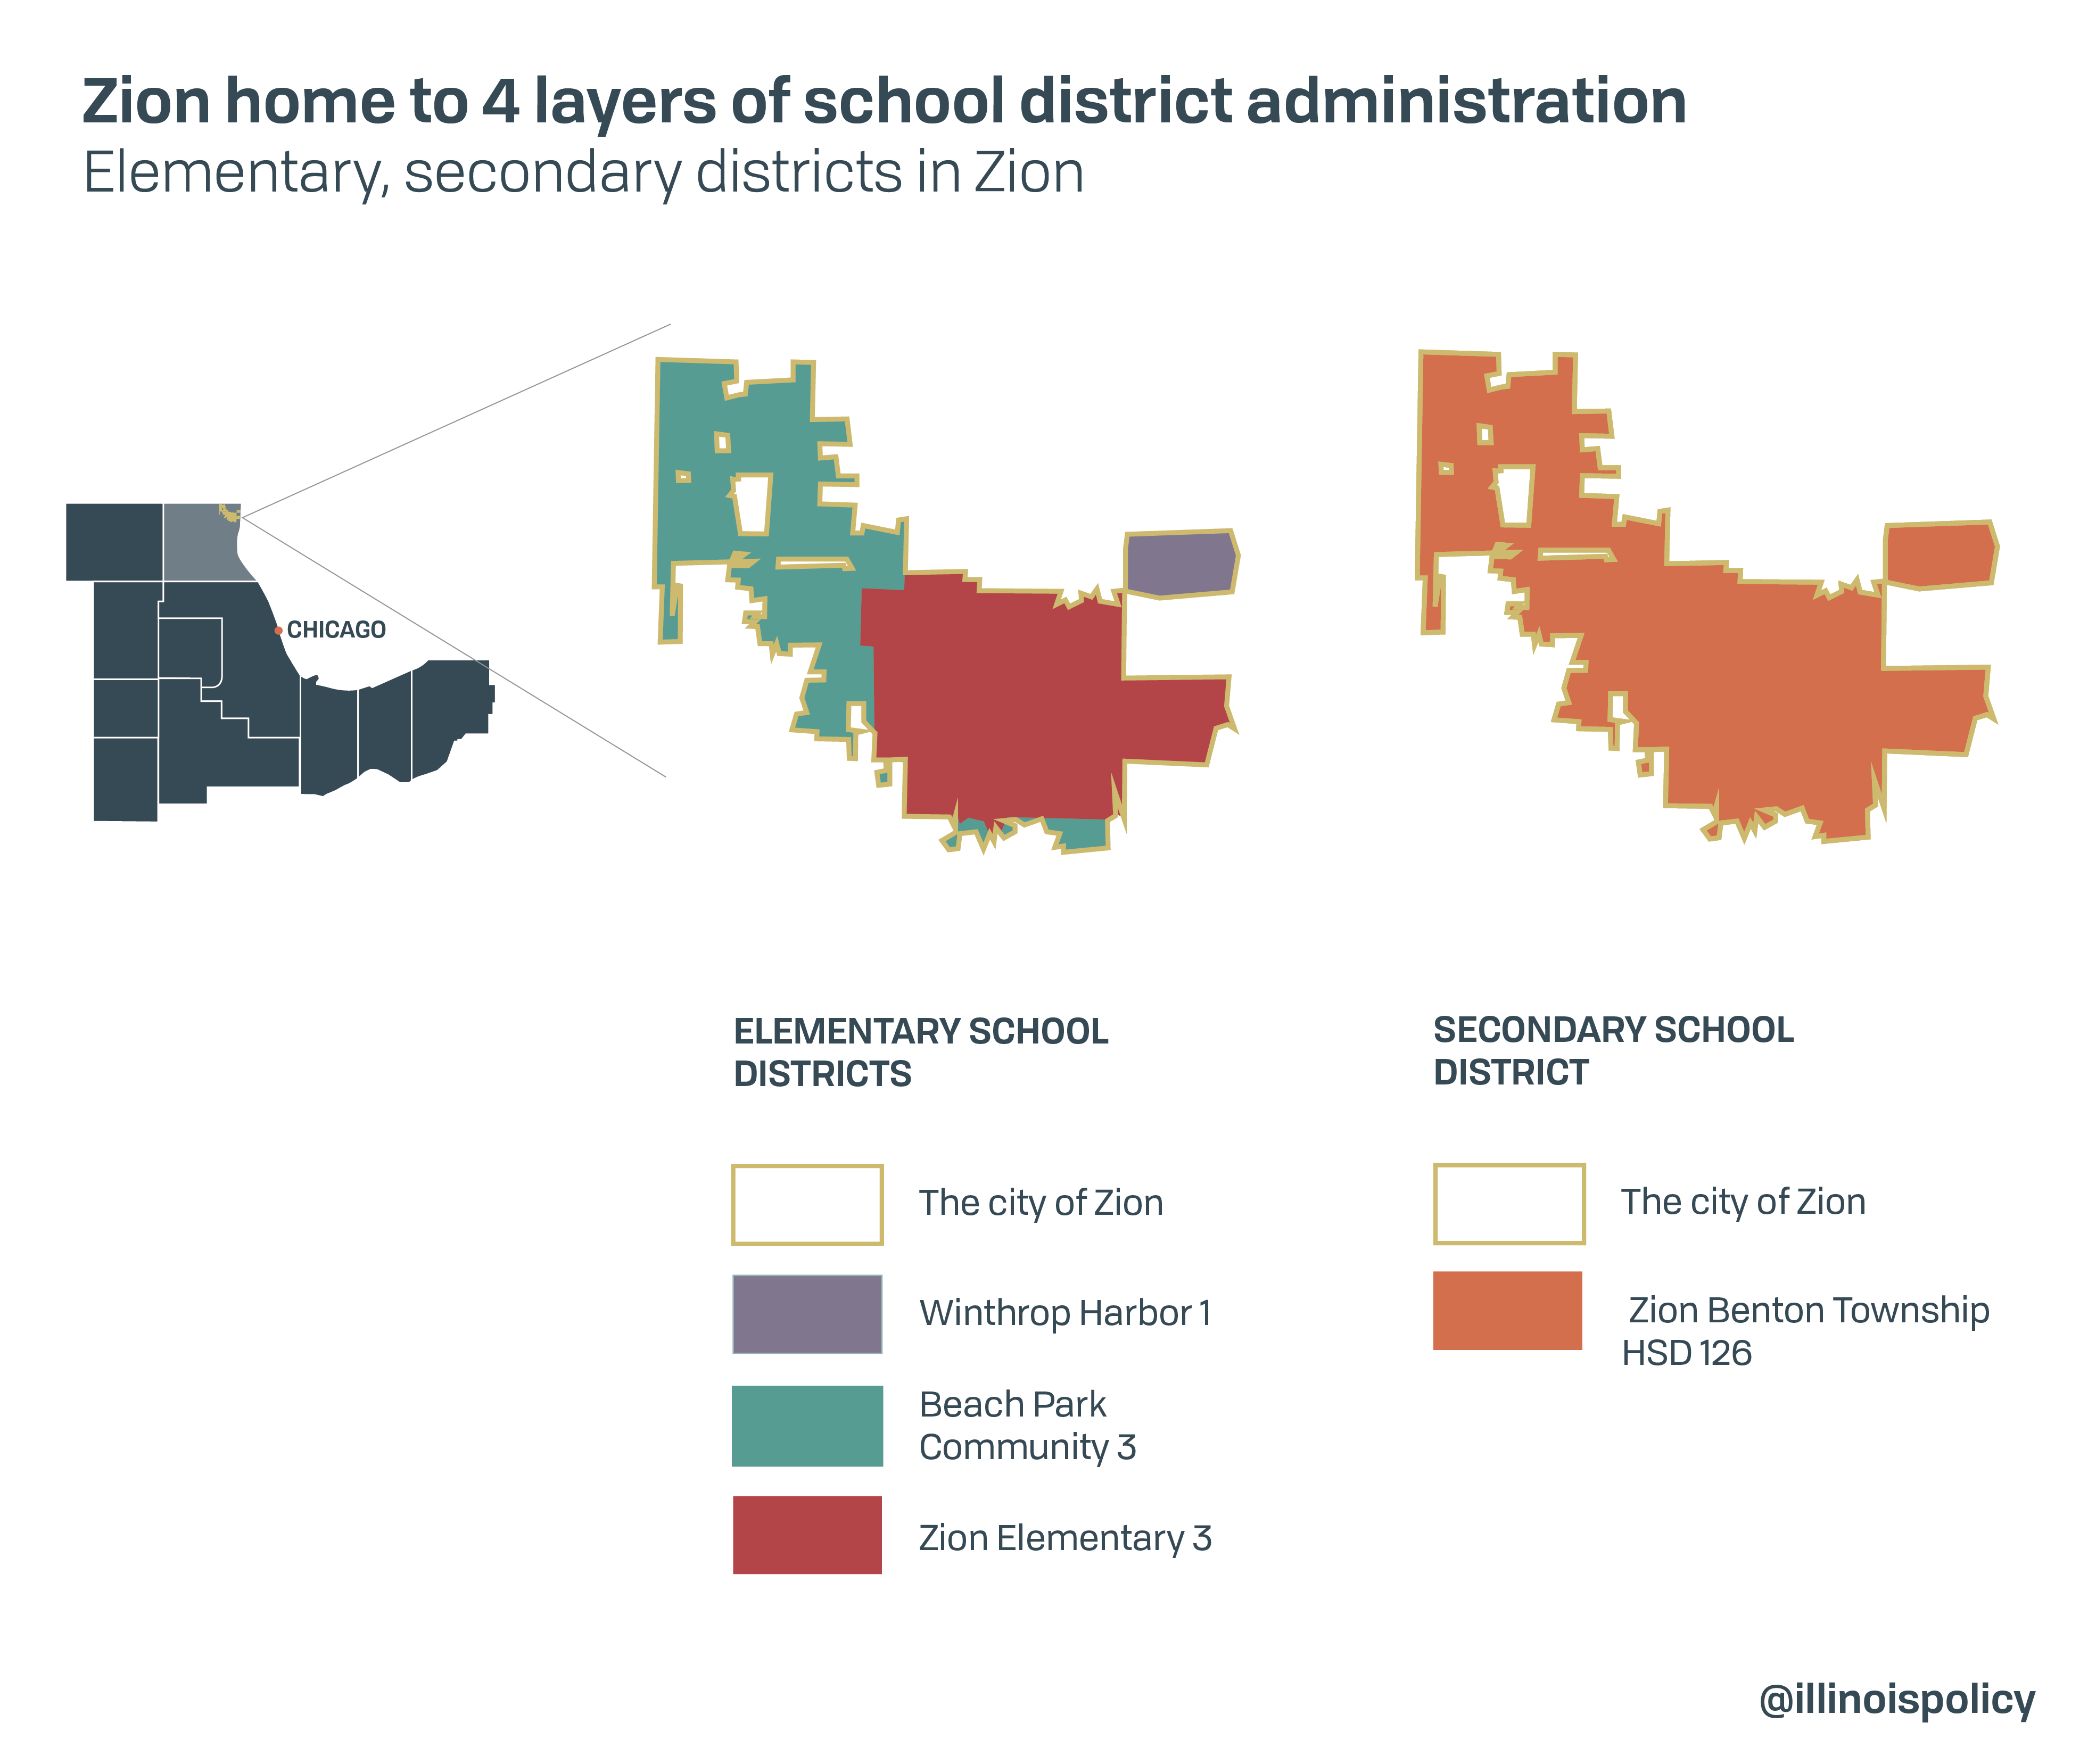 Zion home to 4 layers of school district administration